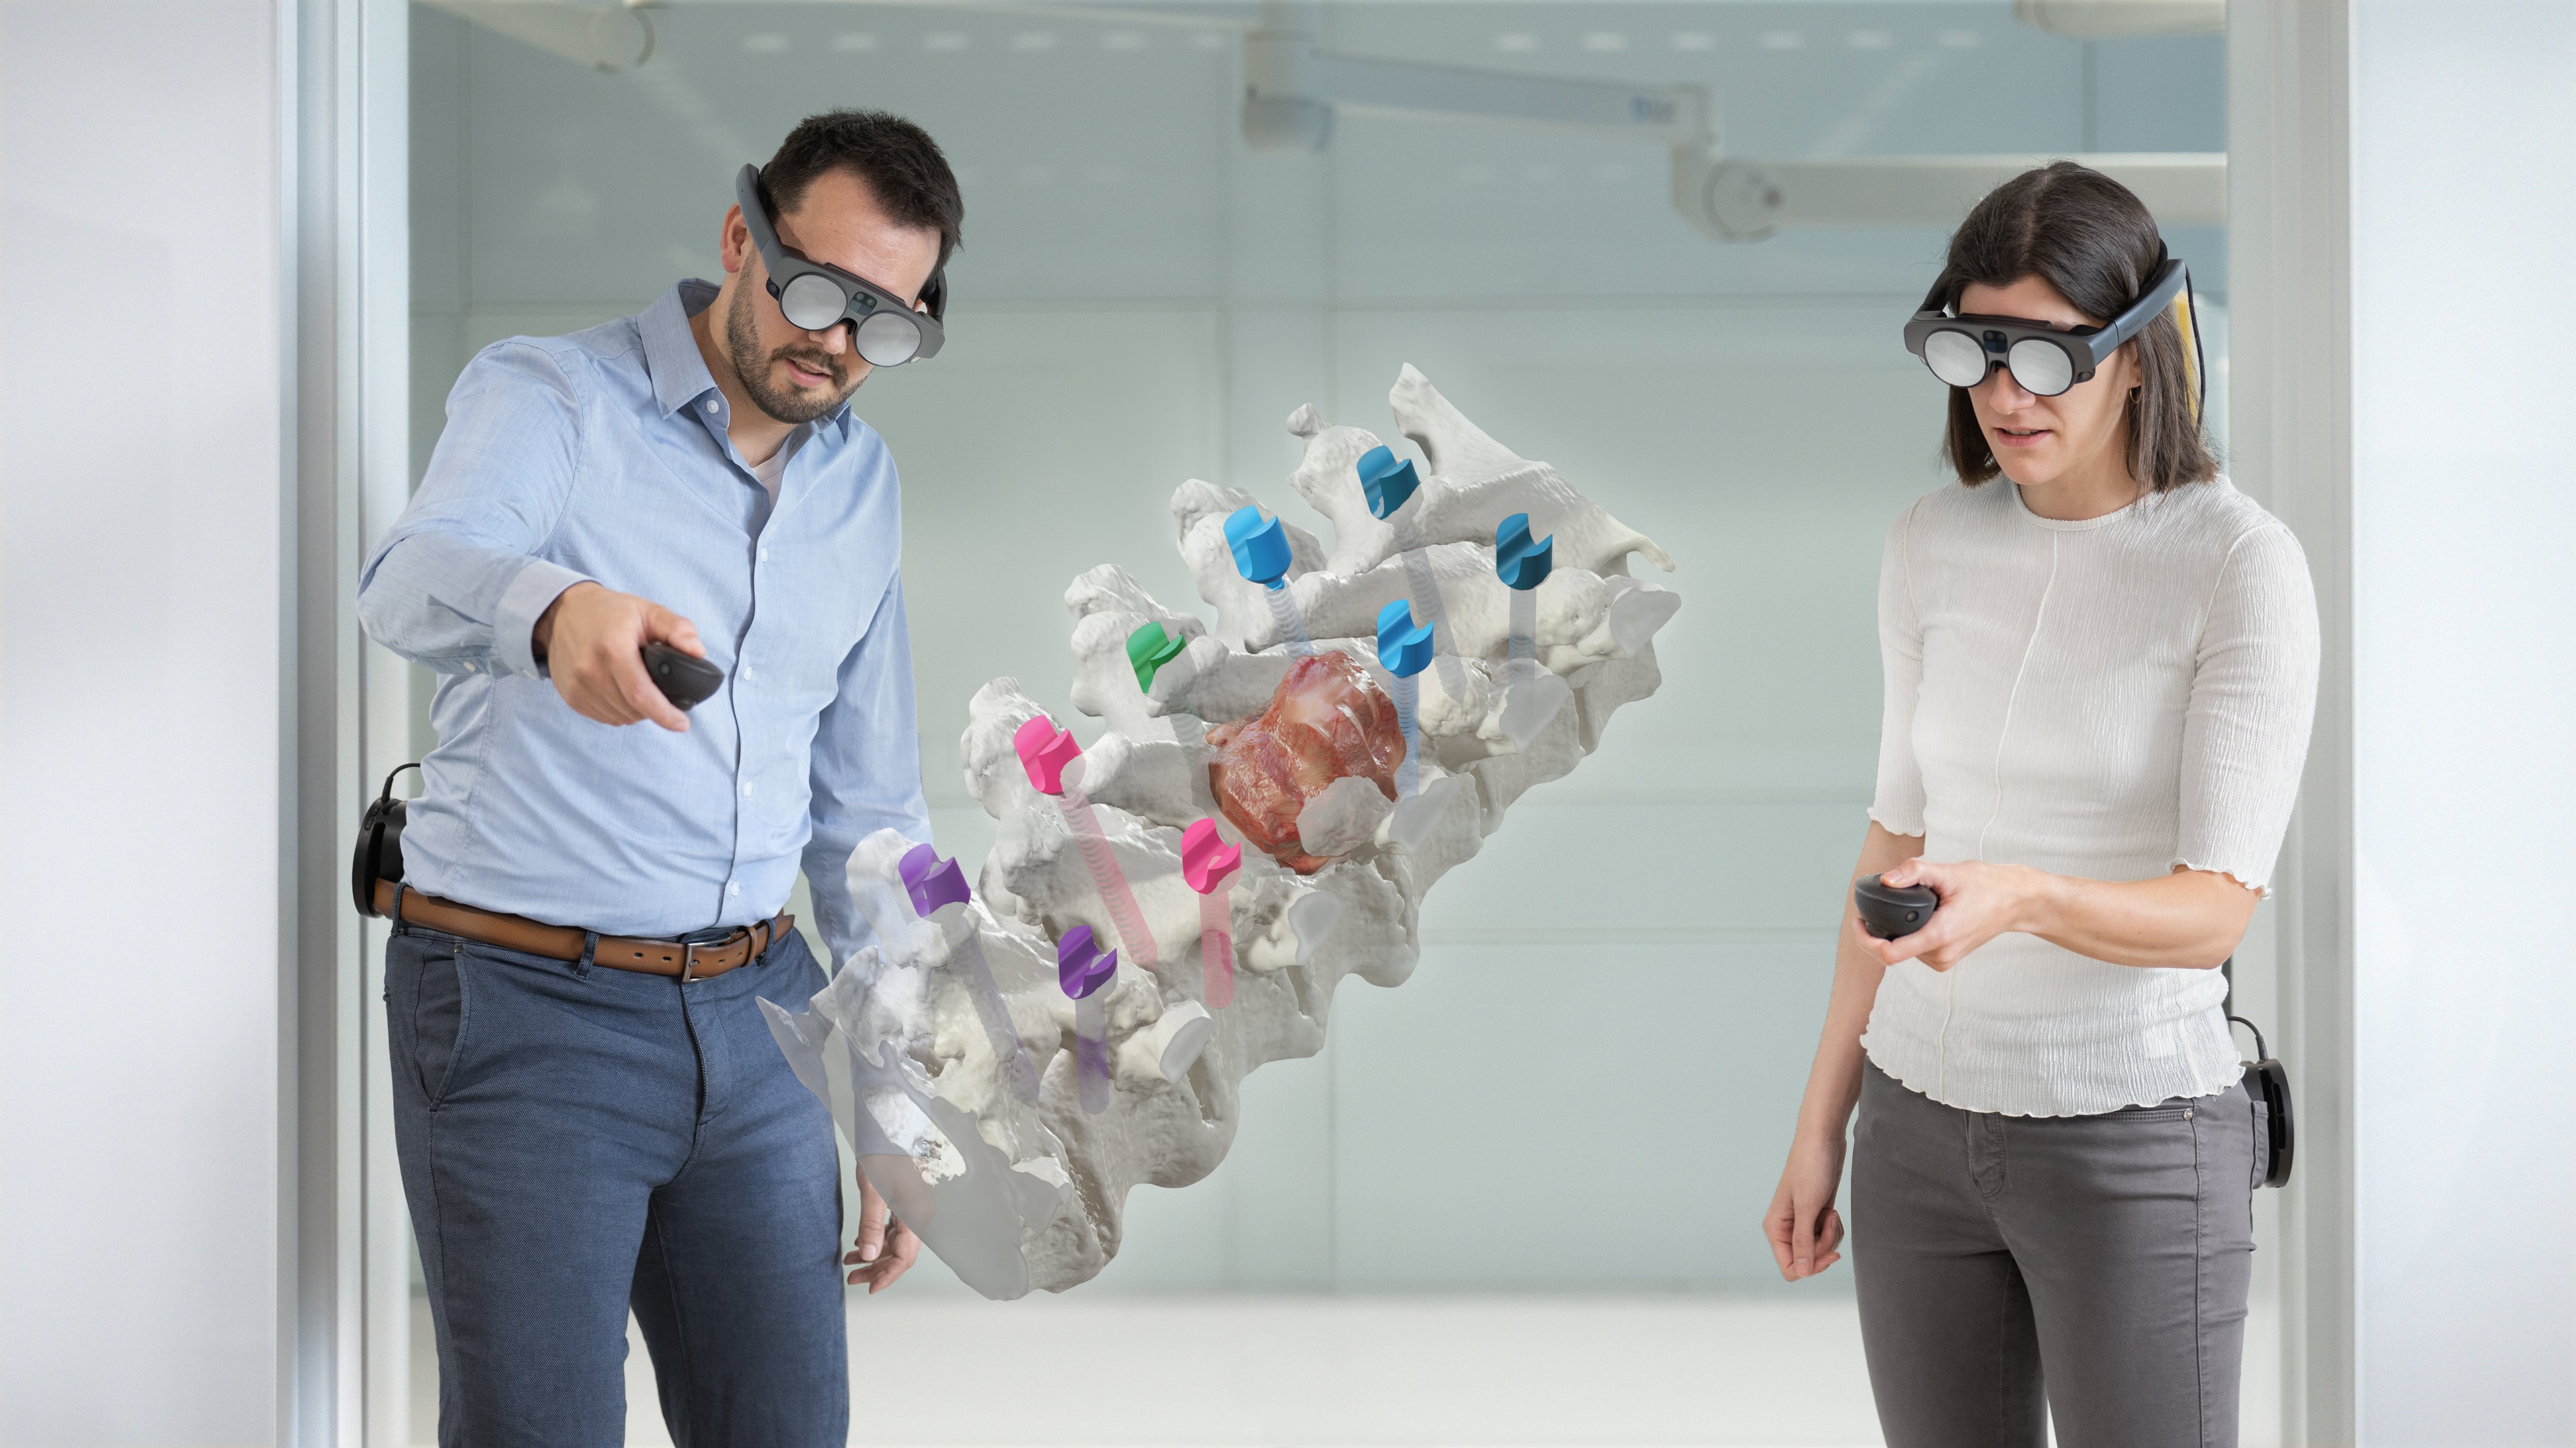 Brainlab's Mixed Reality Viewer in action, with two individuals in an office setting viewing a spinal image